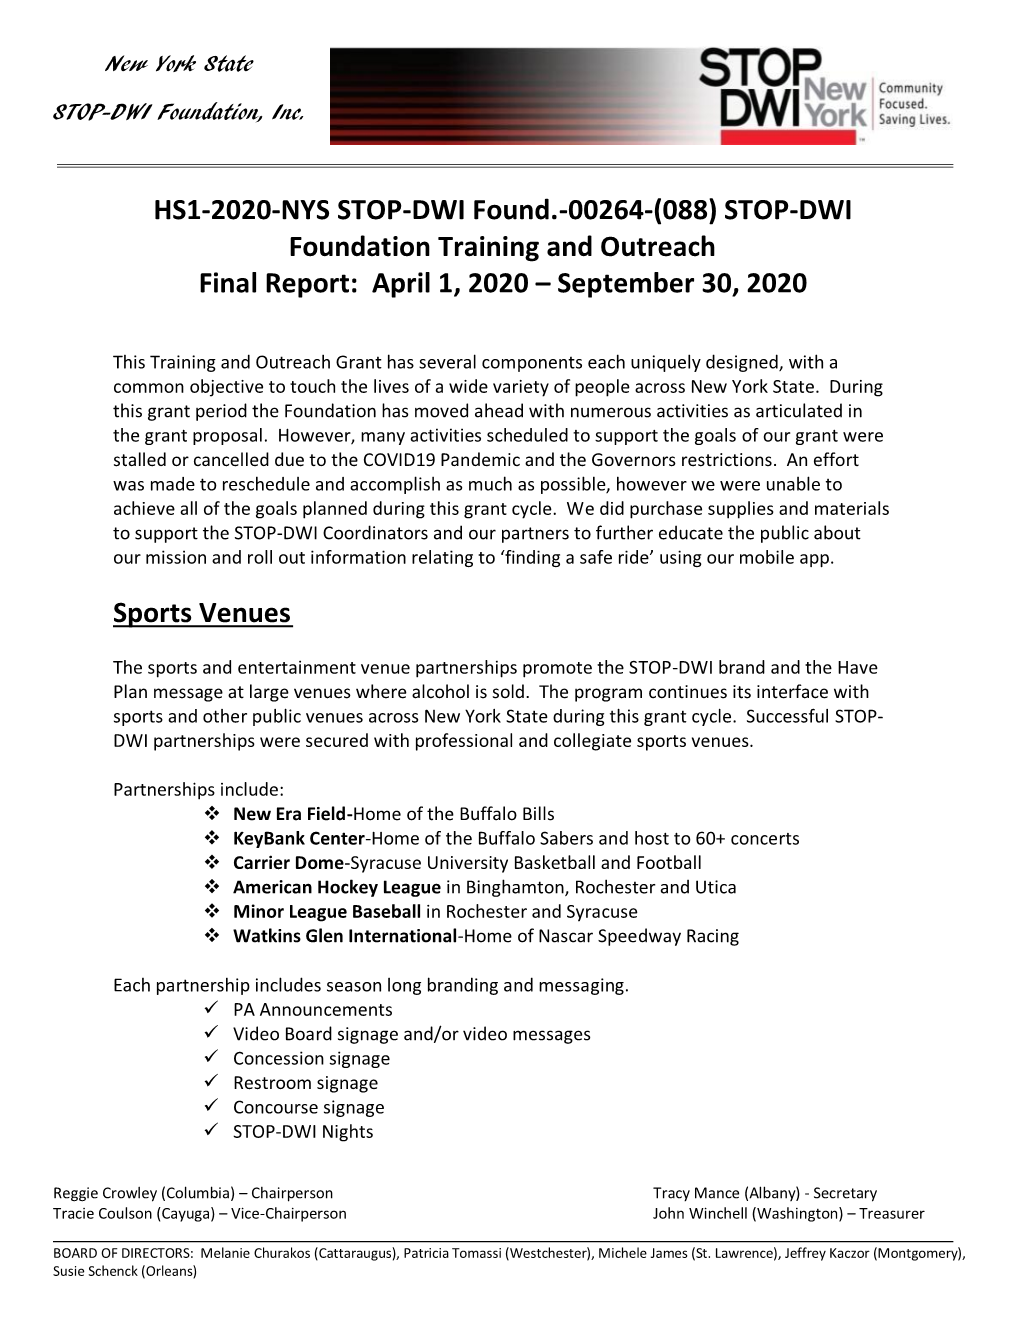 HS1-2020-NYS STOP-DWI Found.-00264-(088) STOP-DWI Foundation Training and Outreach Final Report: April 1, 2020 – September 30, 2020